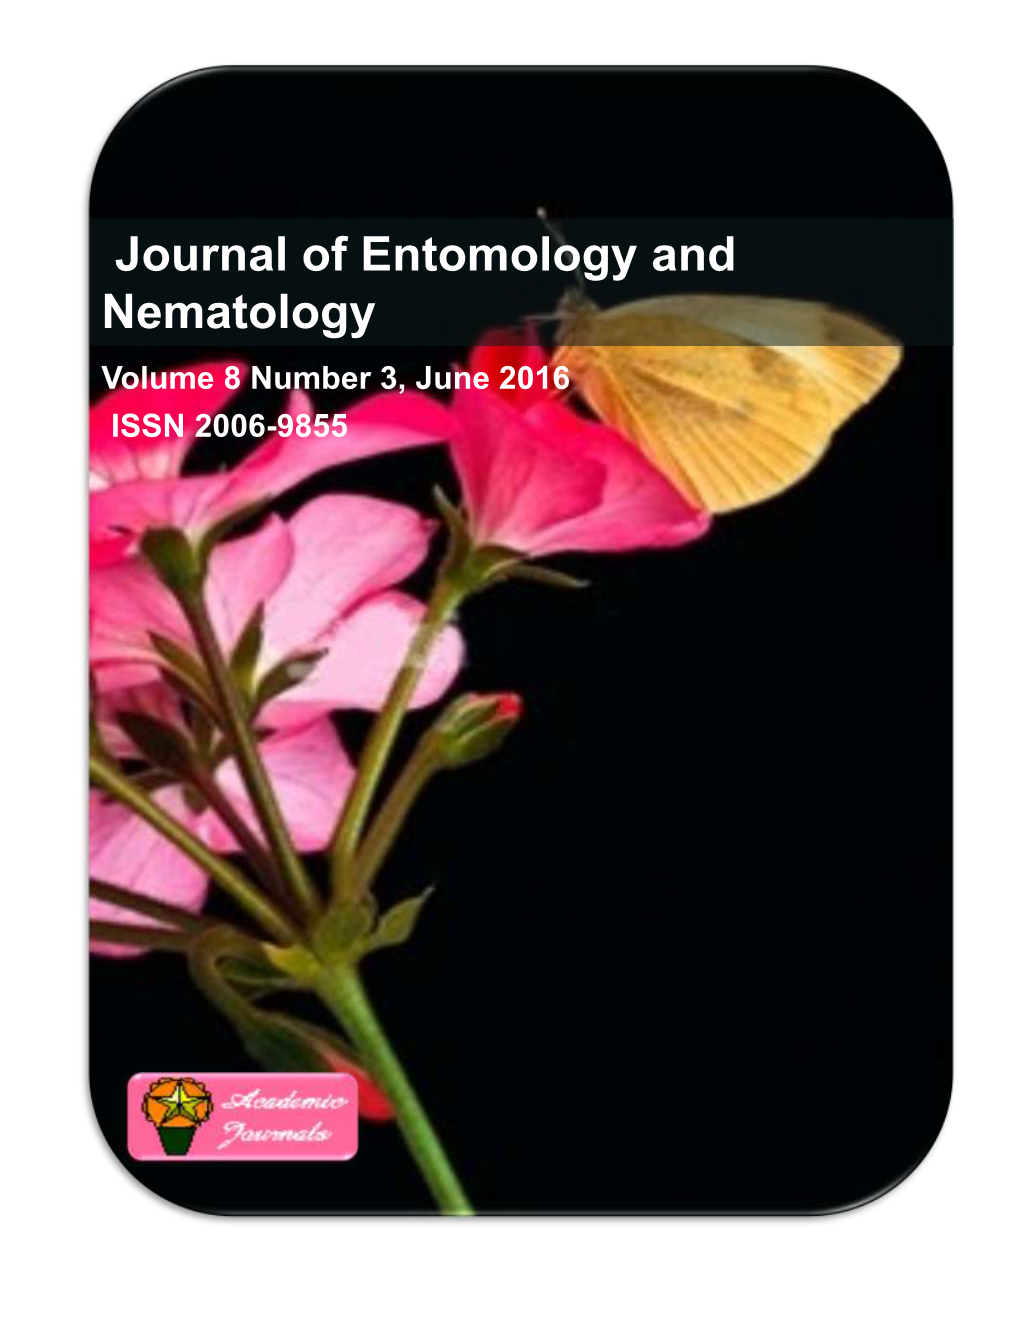 Journal of Entomology and Nematology Volume 8 Number 3, June 2016 ISSN 2006-9855